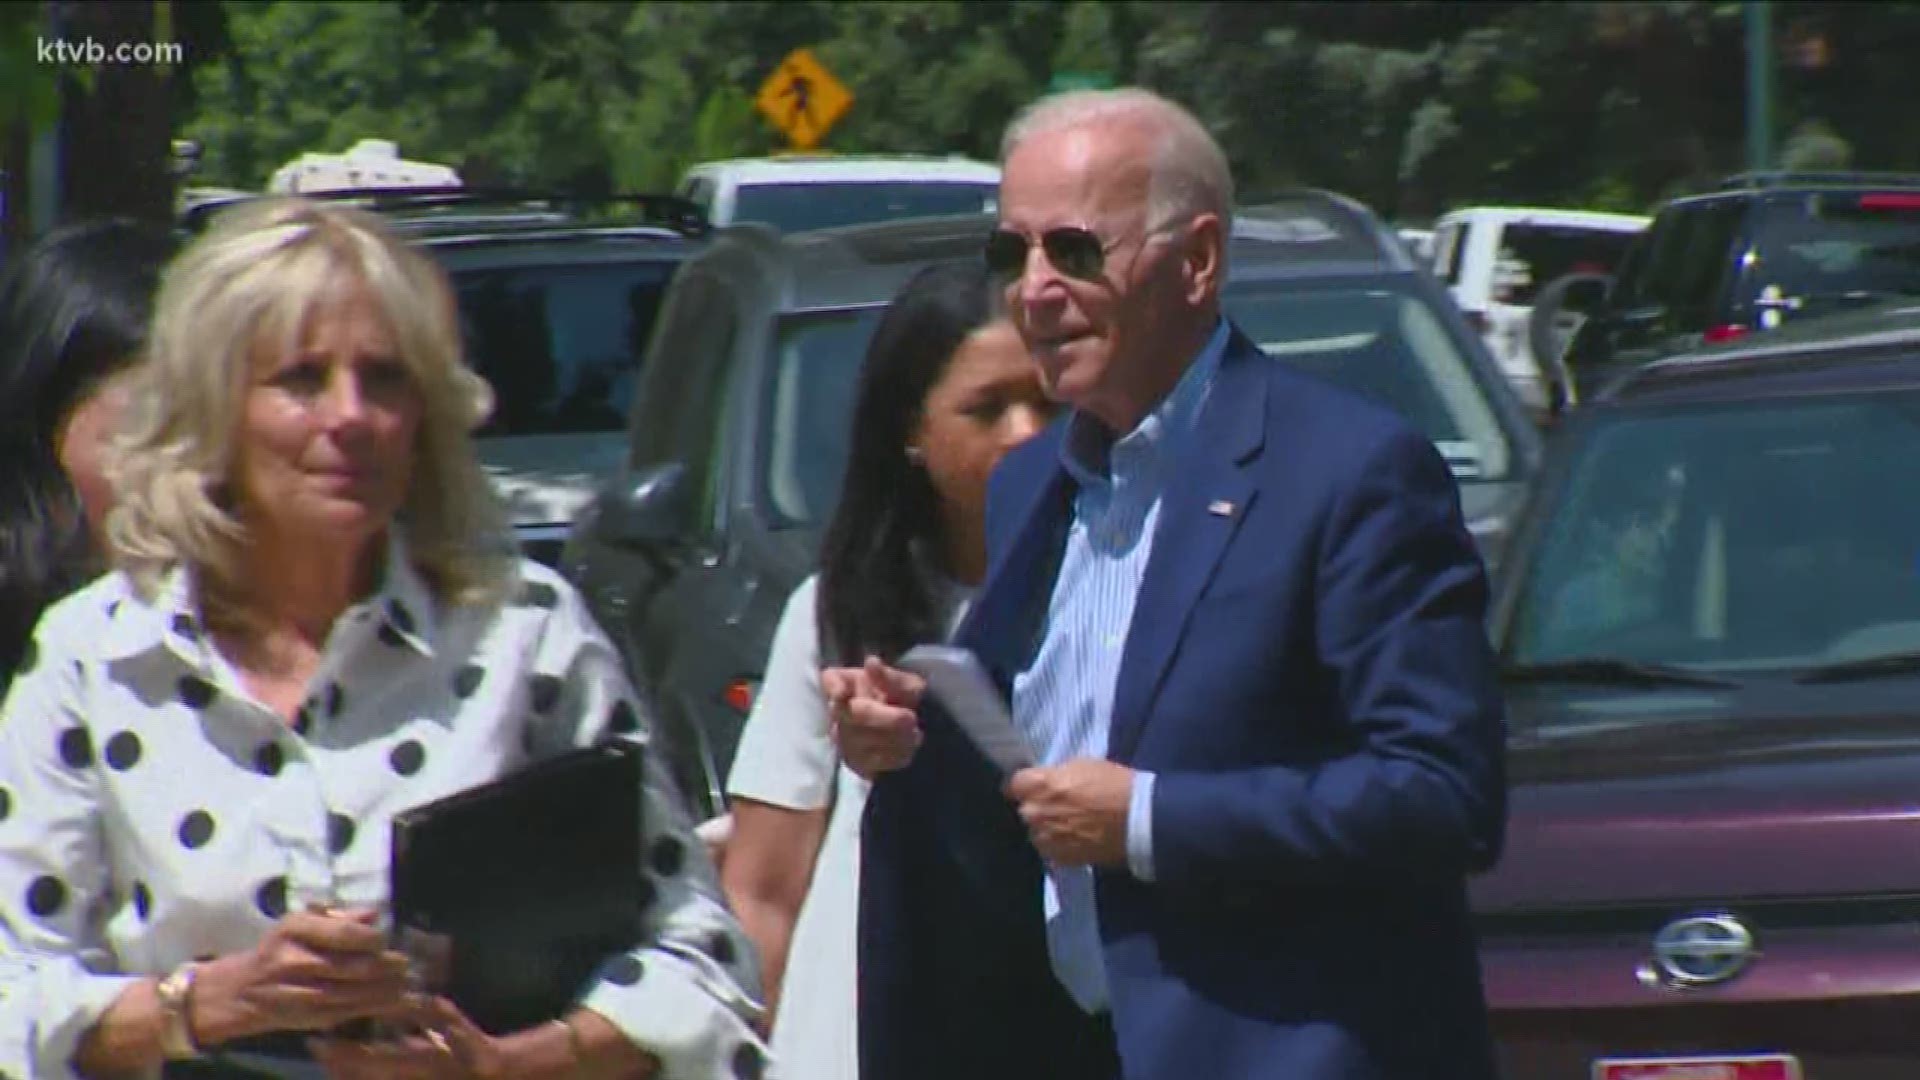 The event was held at a home on Warm Springs Avenue in Boise and about 300 people attended the event. Supporters at the event say Joe Biden is the Democratic Party's best chance at beating President Donald Trump in the 2020 election.